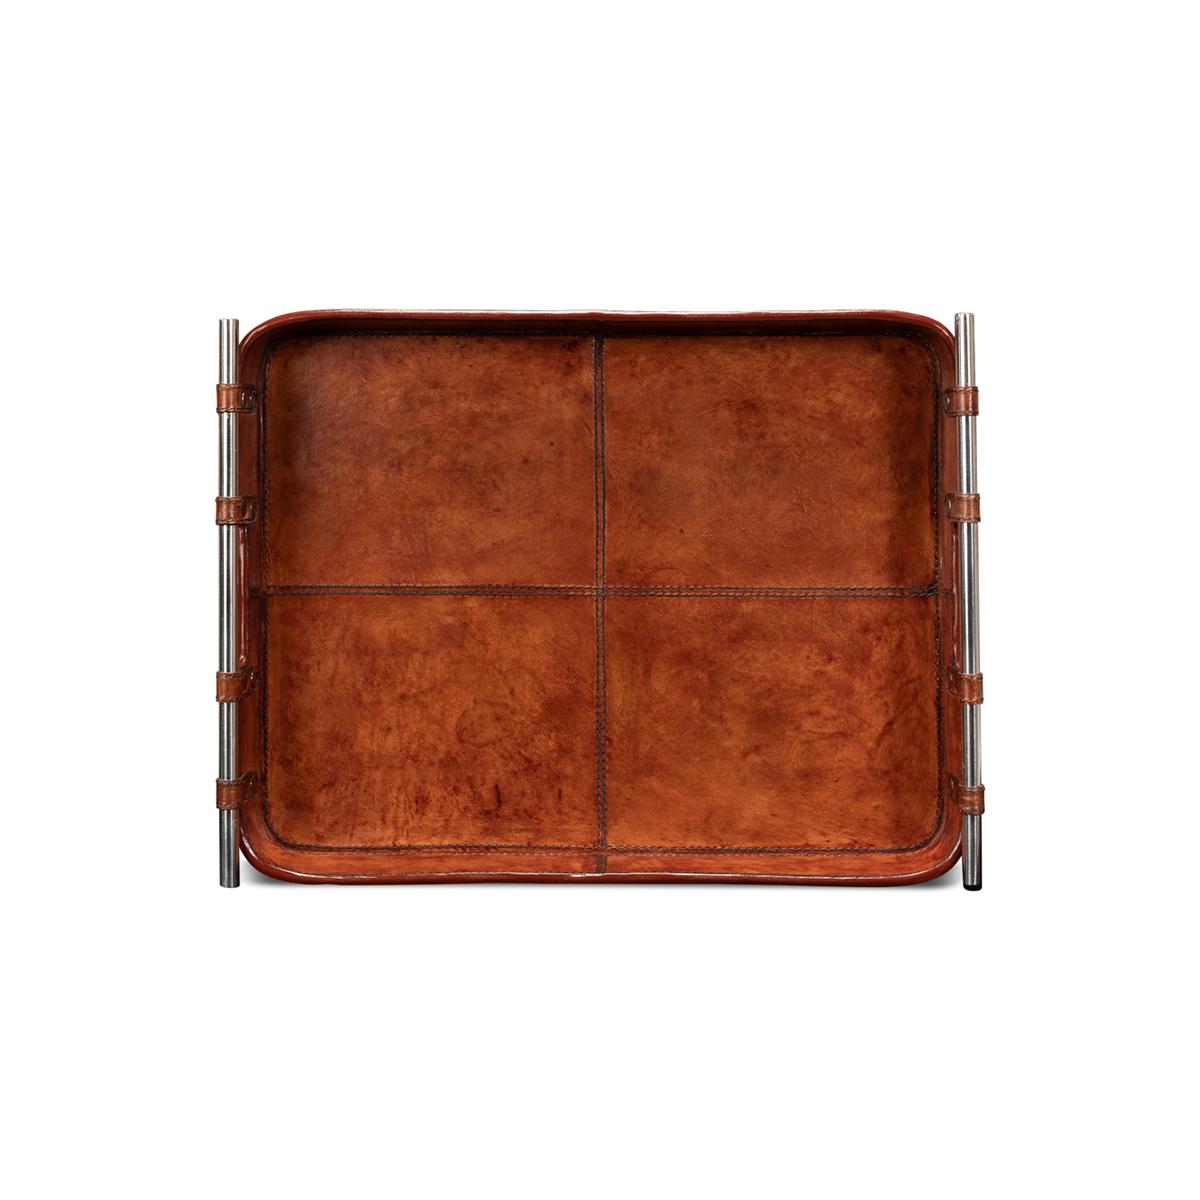 With Tobacco brown leather, this leather tray is fraught with detail: the topstitching of each leather panel, the narrow leather straps that hold the stainless steel handles in place. 

Dimensions: 19